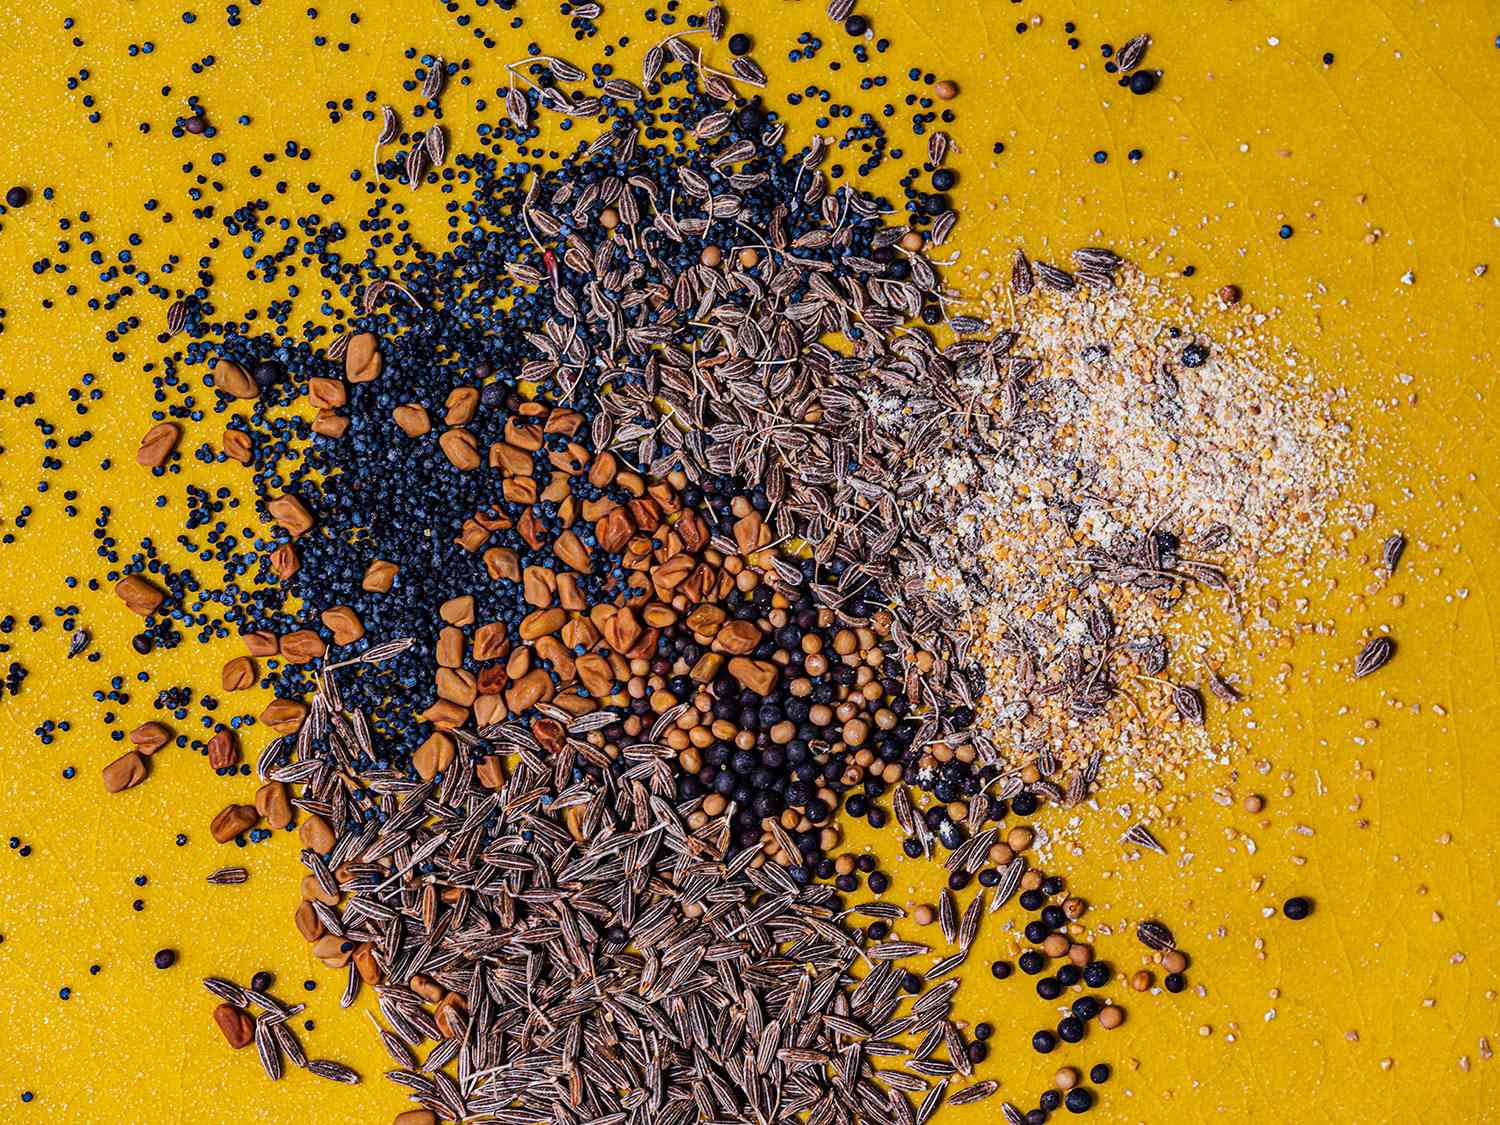 Entire, Dried Spices, Seeds, and Small Beans